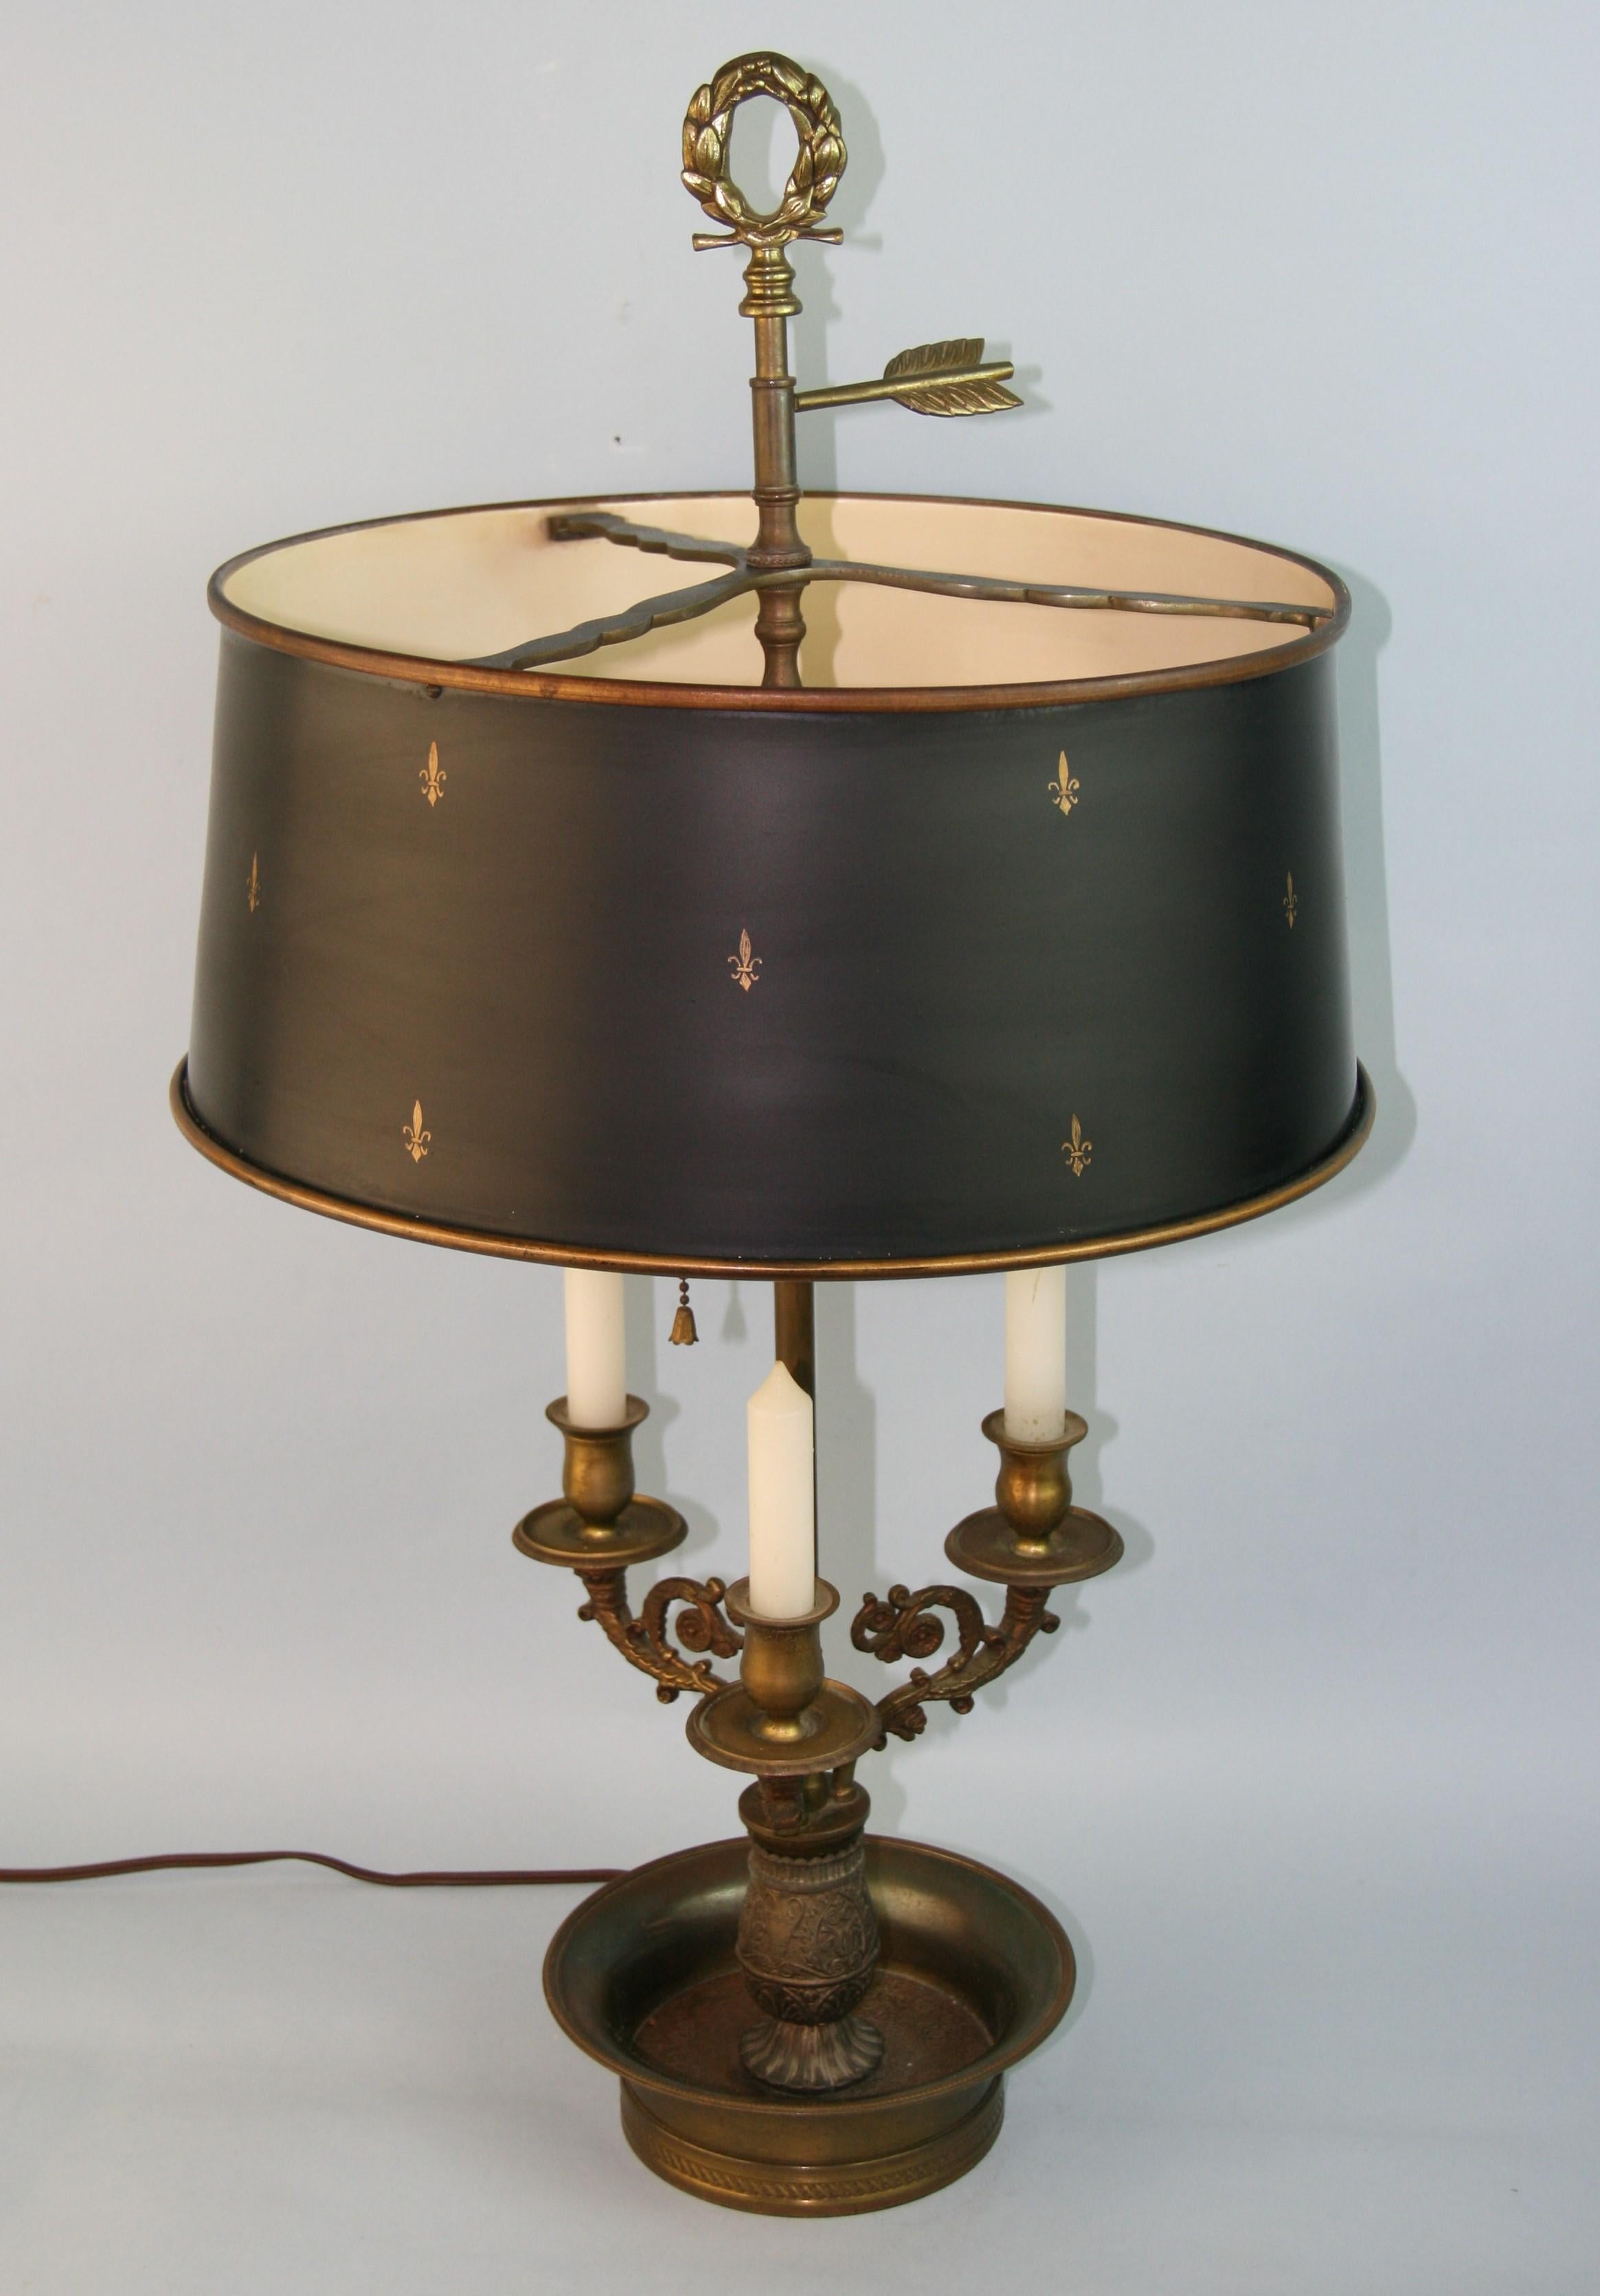 3-1147 Detailed French brass lamp with 2 light cluster.
Takes 2 60 watt Edison bulbs
Has 3 wax candles
Original wiring in working condition